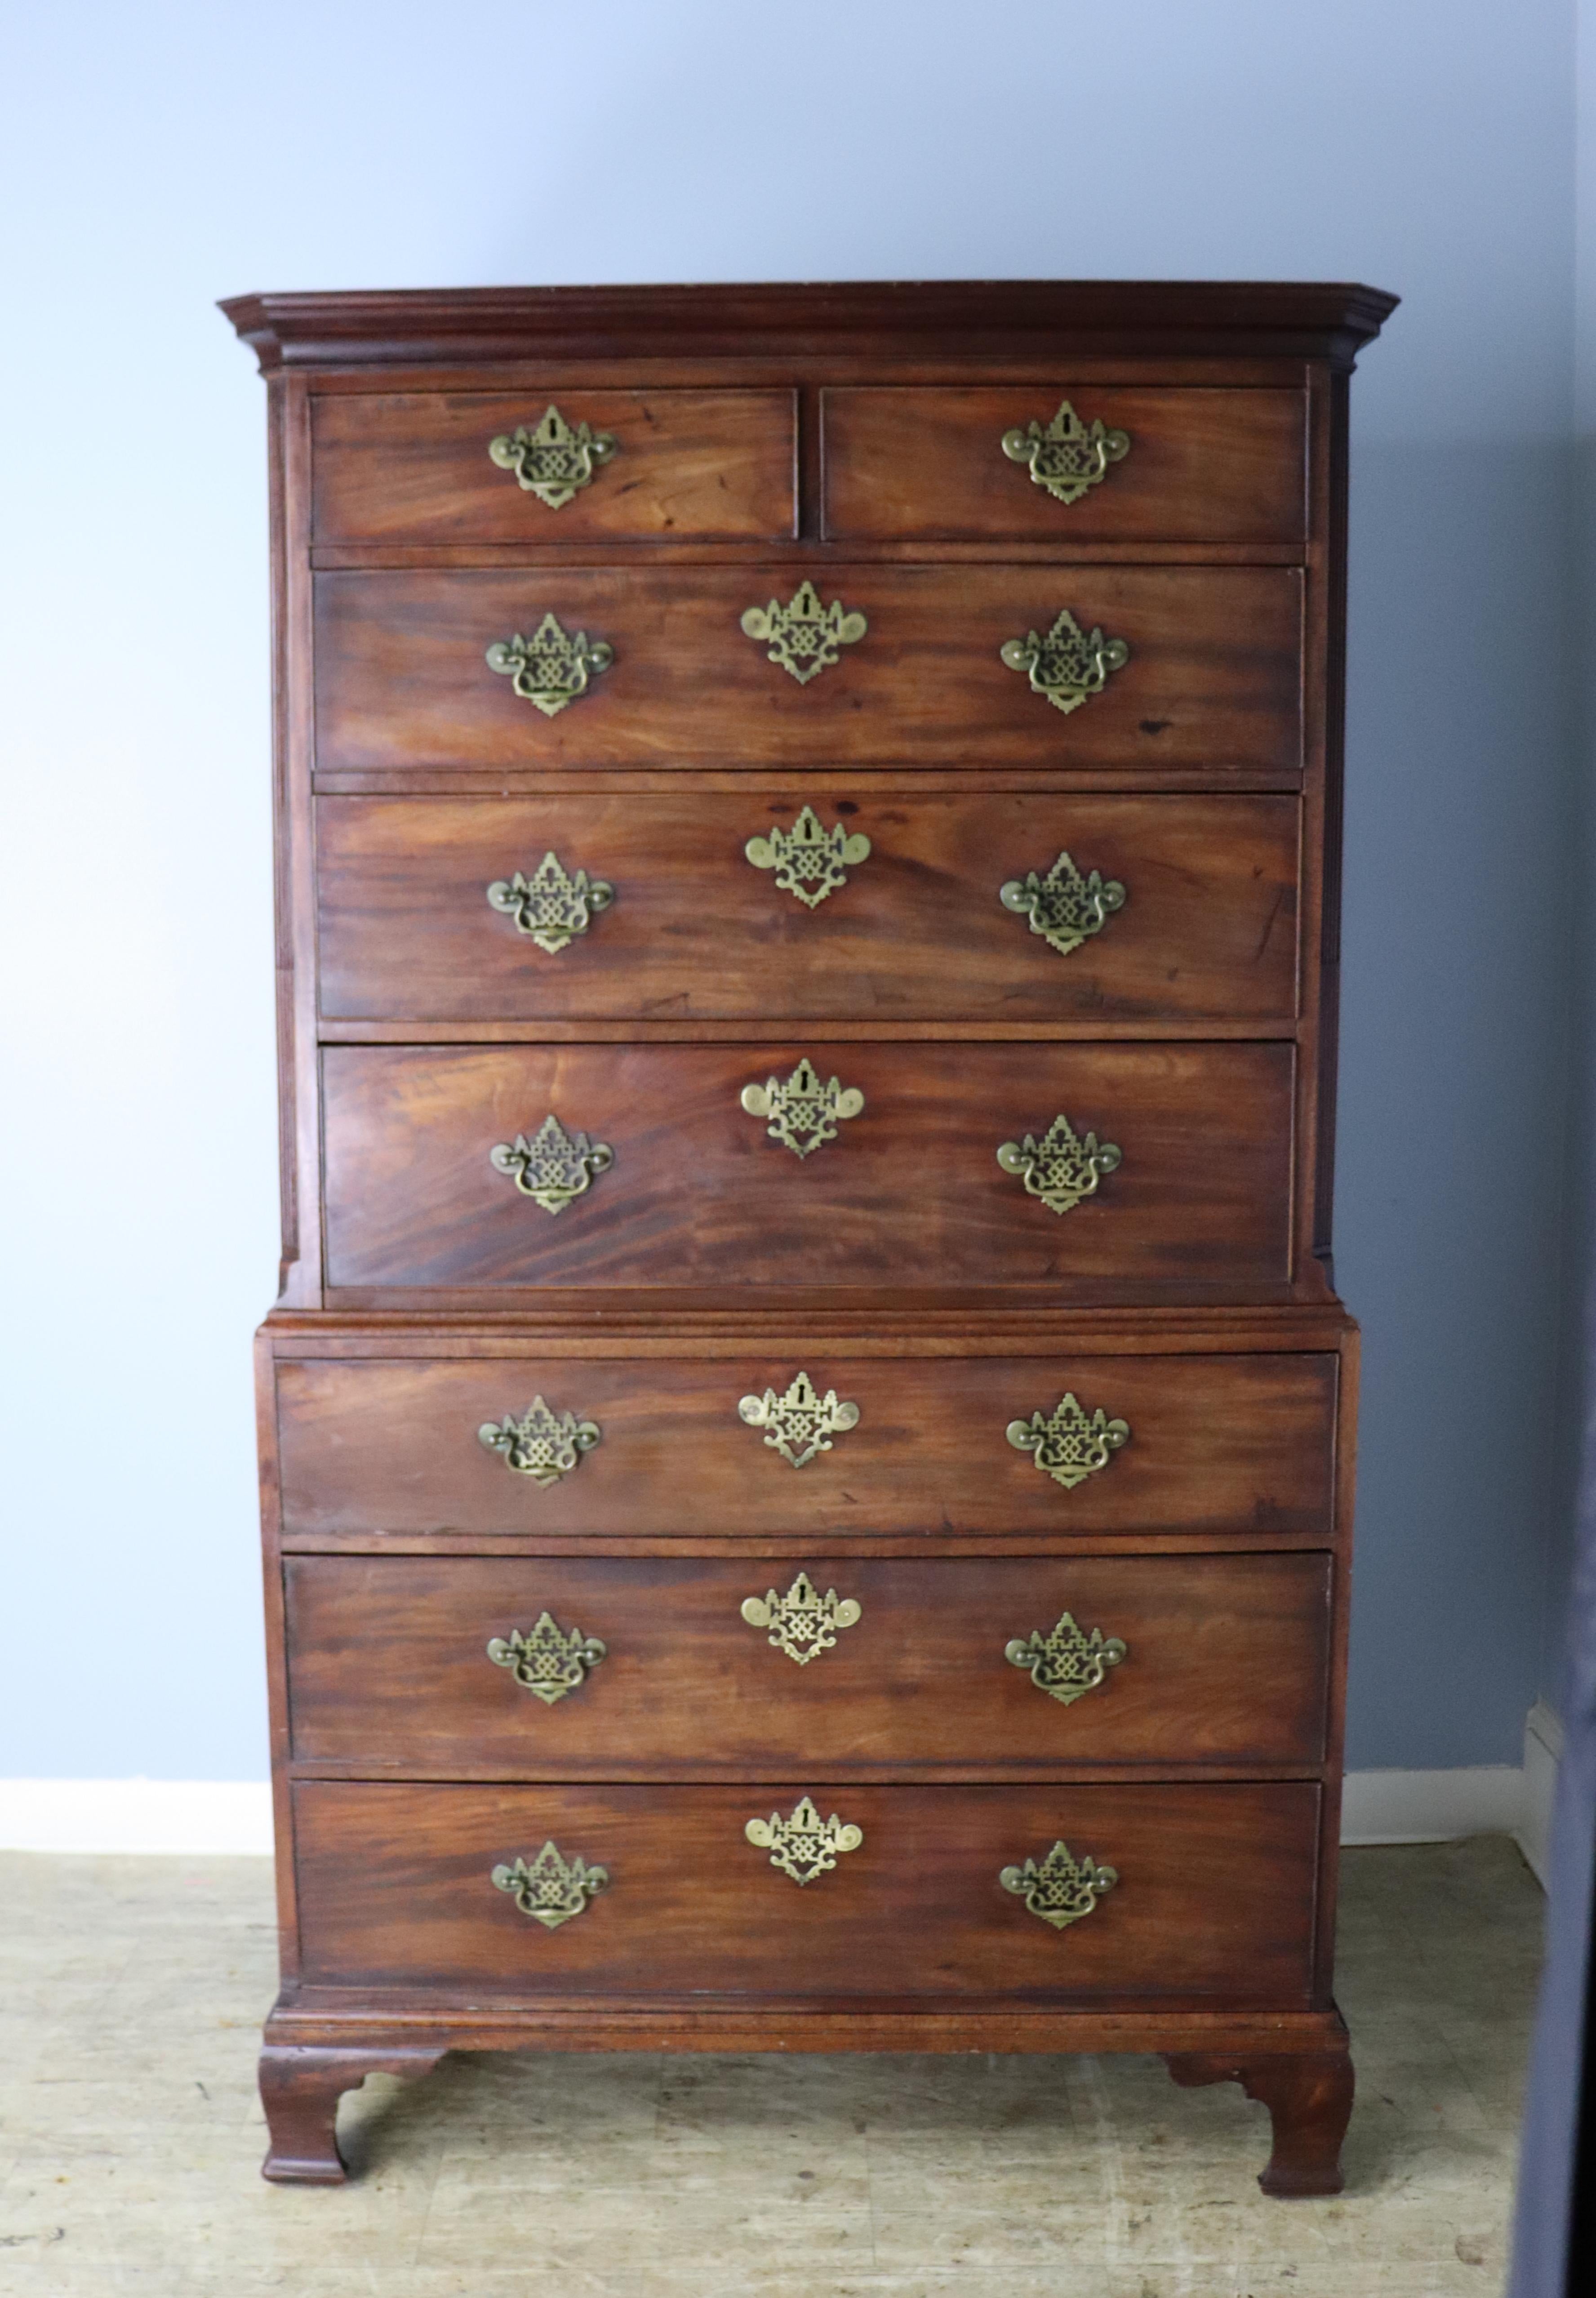 An early Georgian chest on chest of imposing size and beauty.  The mahogany has lovely patina and mellow grain.  Original brasses are in good uniform antique condition.  Reeded corners on the body of the piece and cockbeaded drawers add further